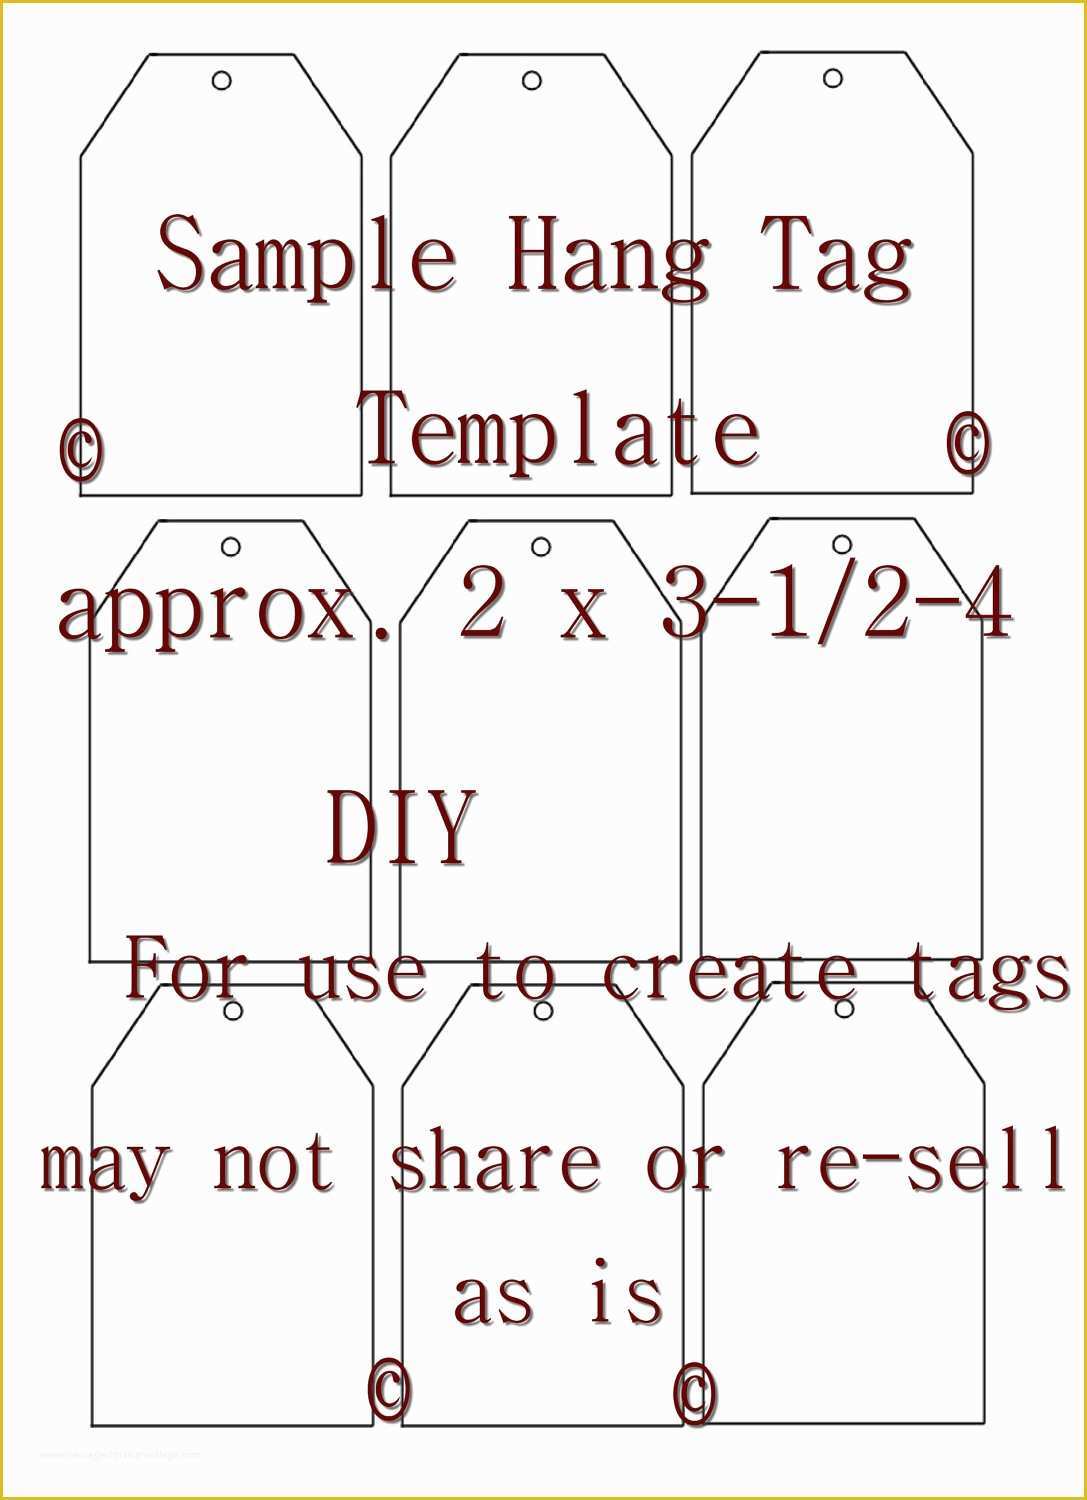 Hang Tag Template Free Of Unavailable Listing On Etsy